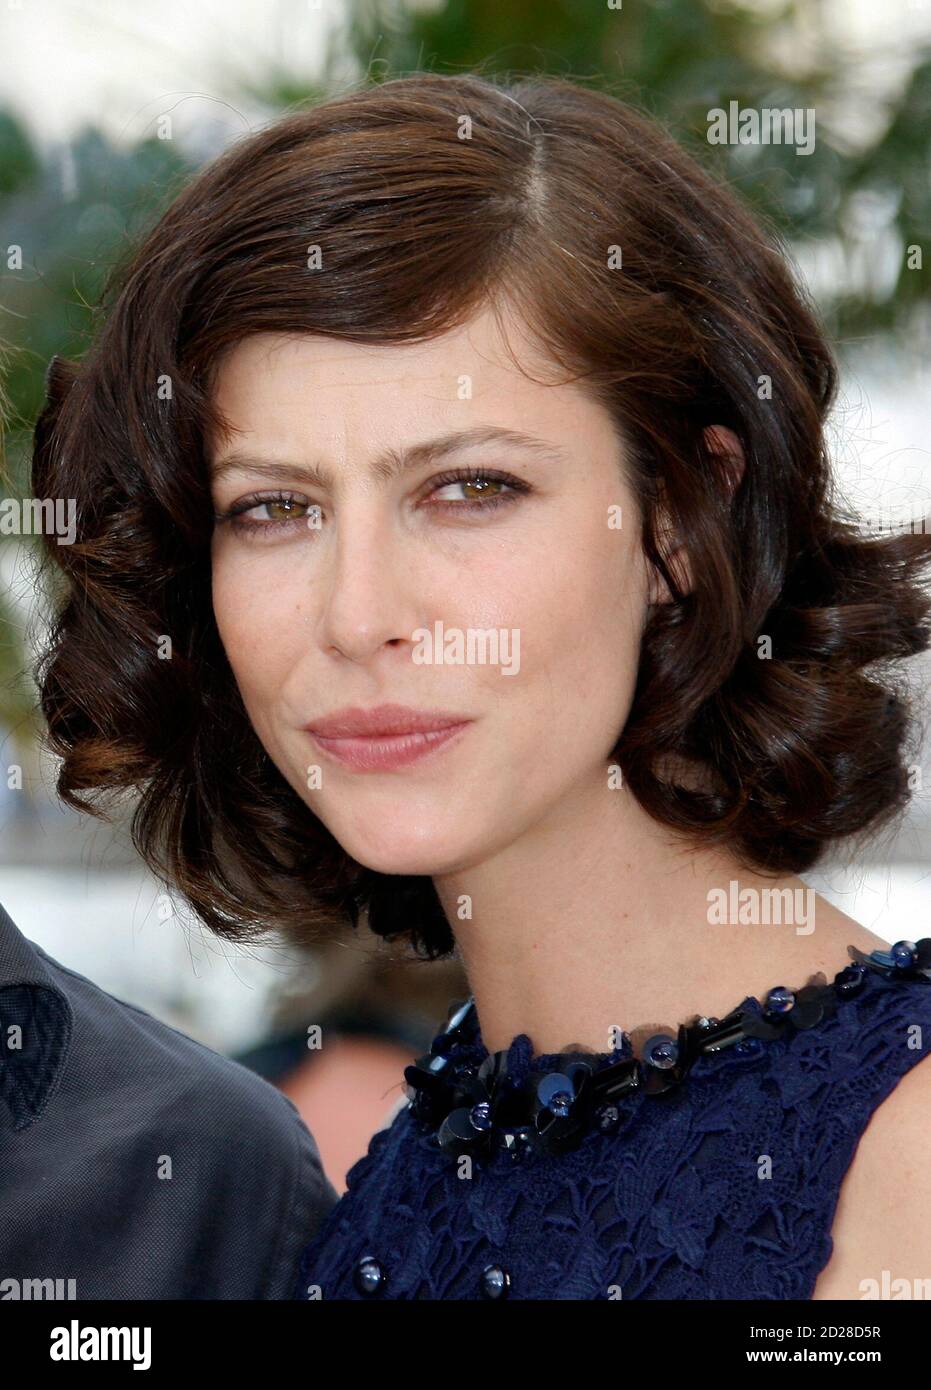 Cast member Anna Mouglalis attends a photocall for the film "Coco Chanel &  Igor Stravinsky" by director Jan Kounen at the 62nd Cannes Film Festival  May 24, 2009. REUTERS/Vincent Kessler (FRANCE ENTERTAINMENT